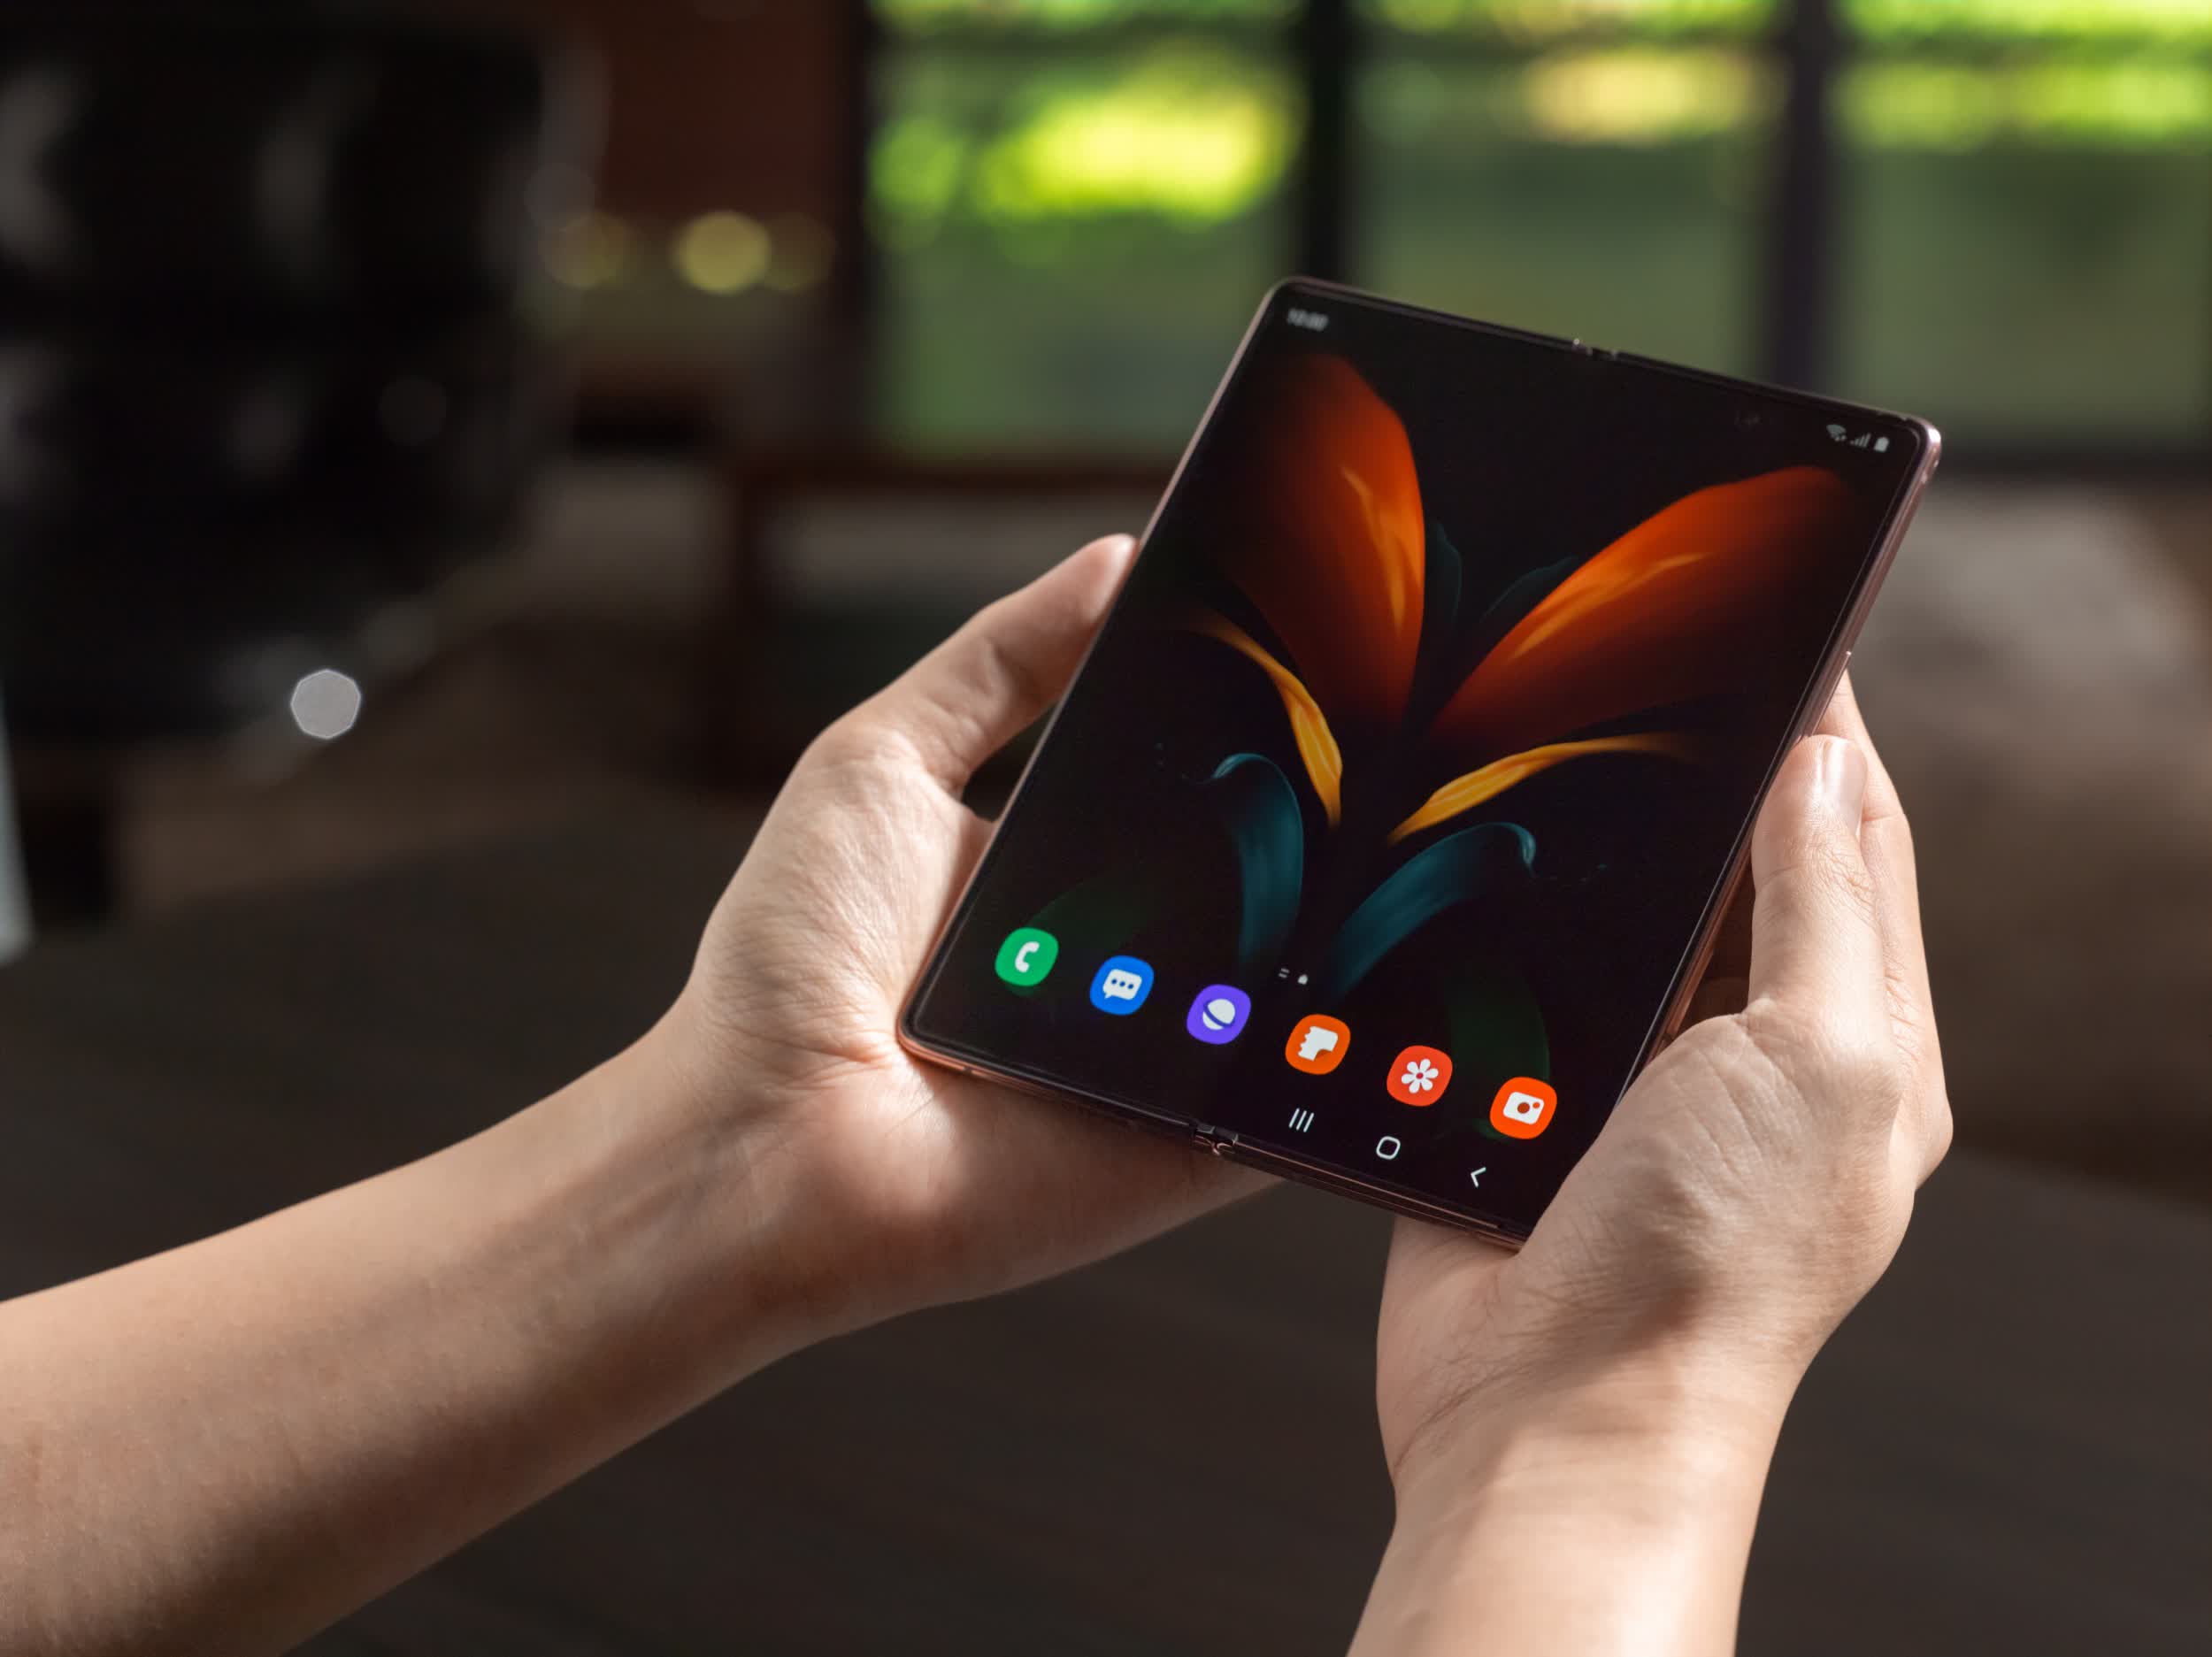 Samsung prices Galaxy Z Fold 2 higher than the original Fold at $1,999.99